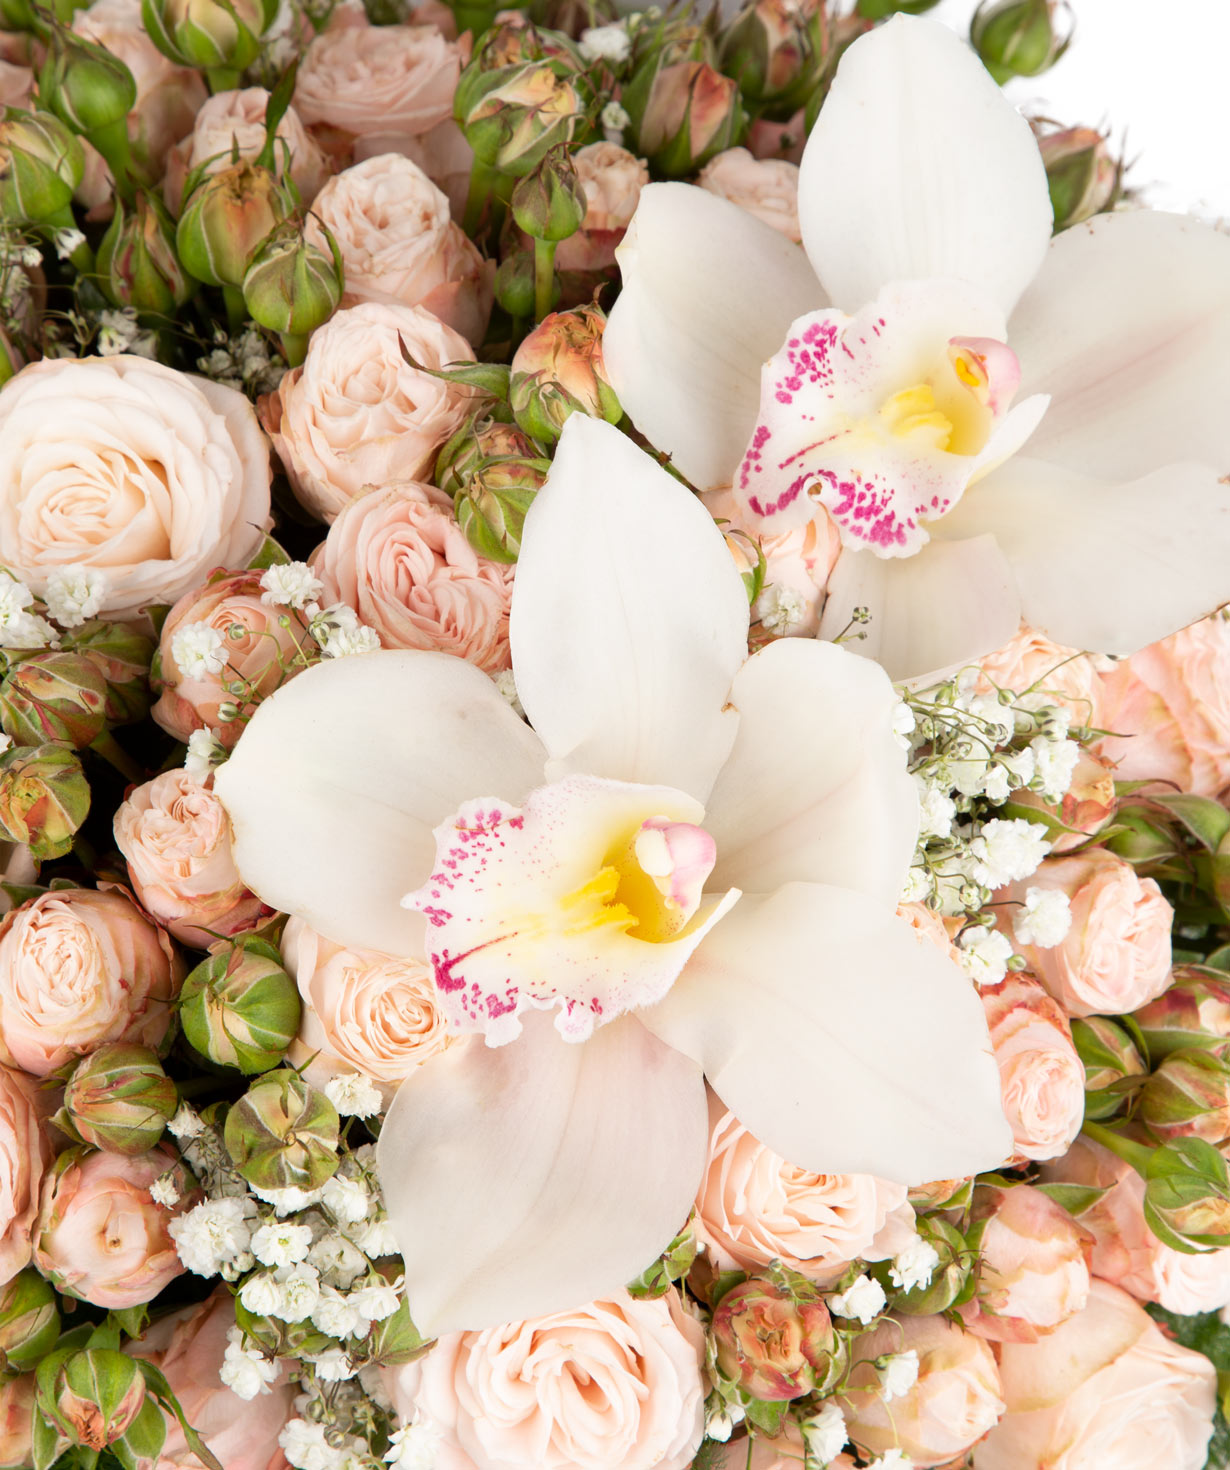 Composition `Gardaban` with spray roses and orchids